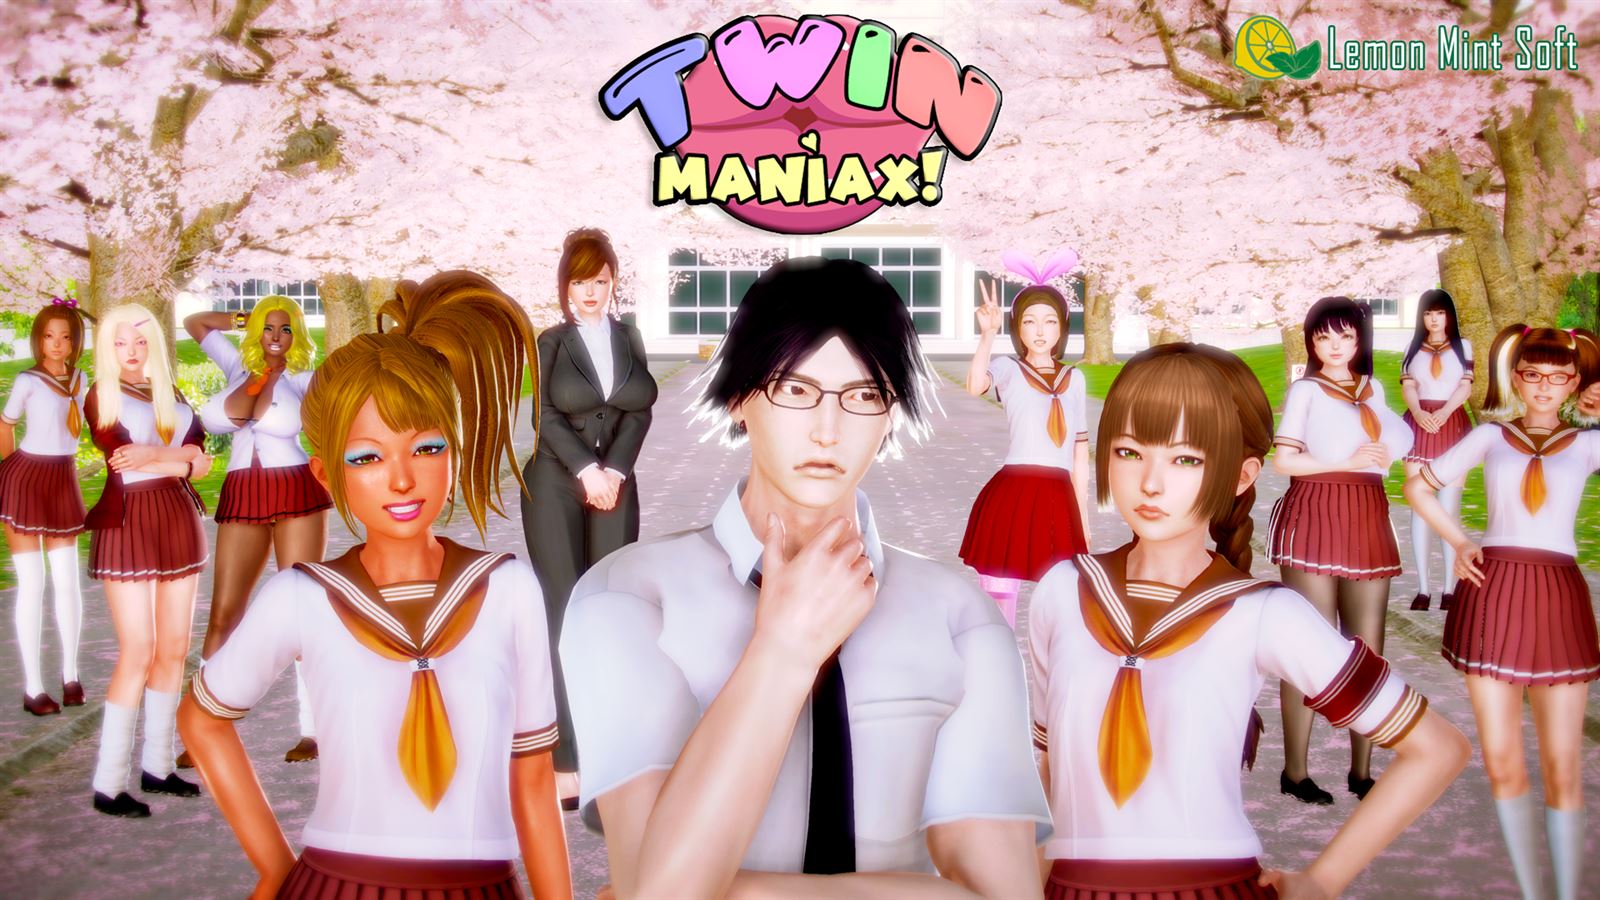 Twin Maniax! porn xxx game download cover